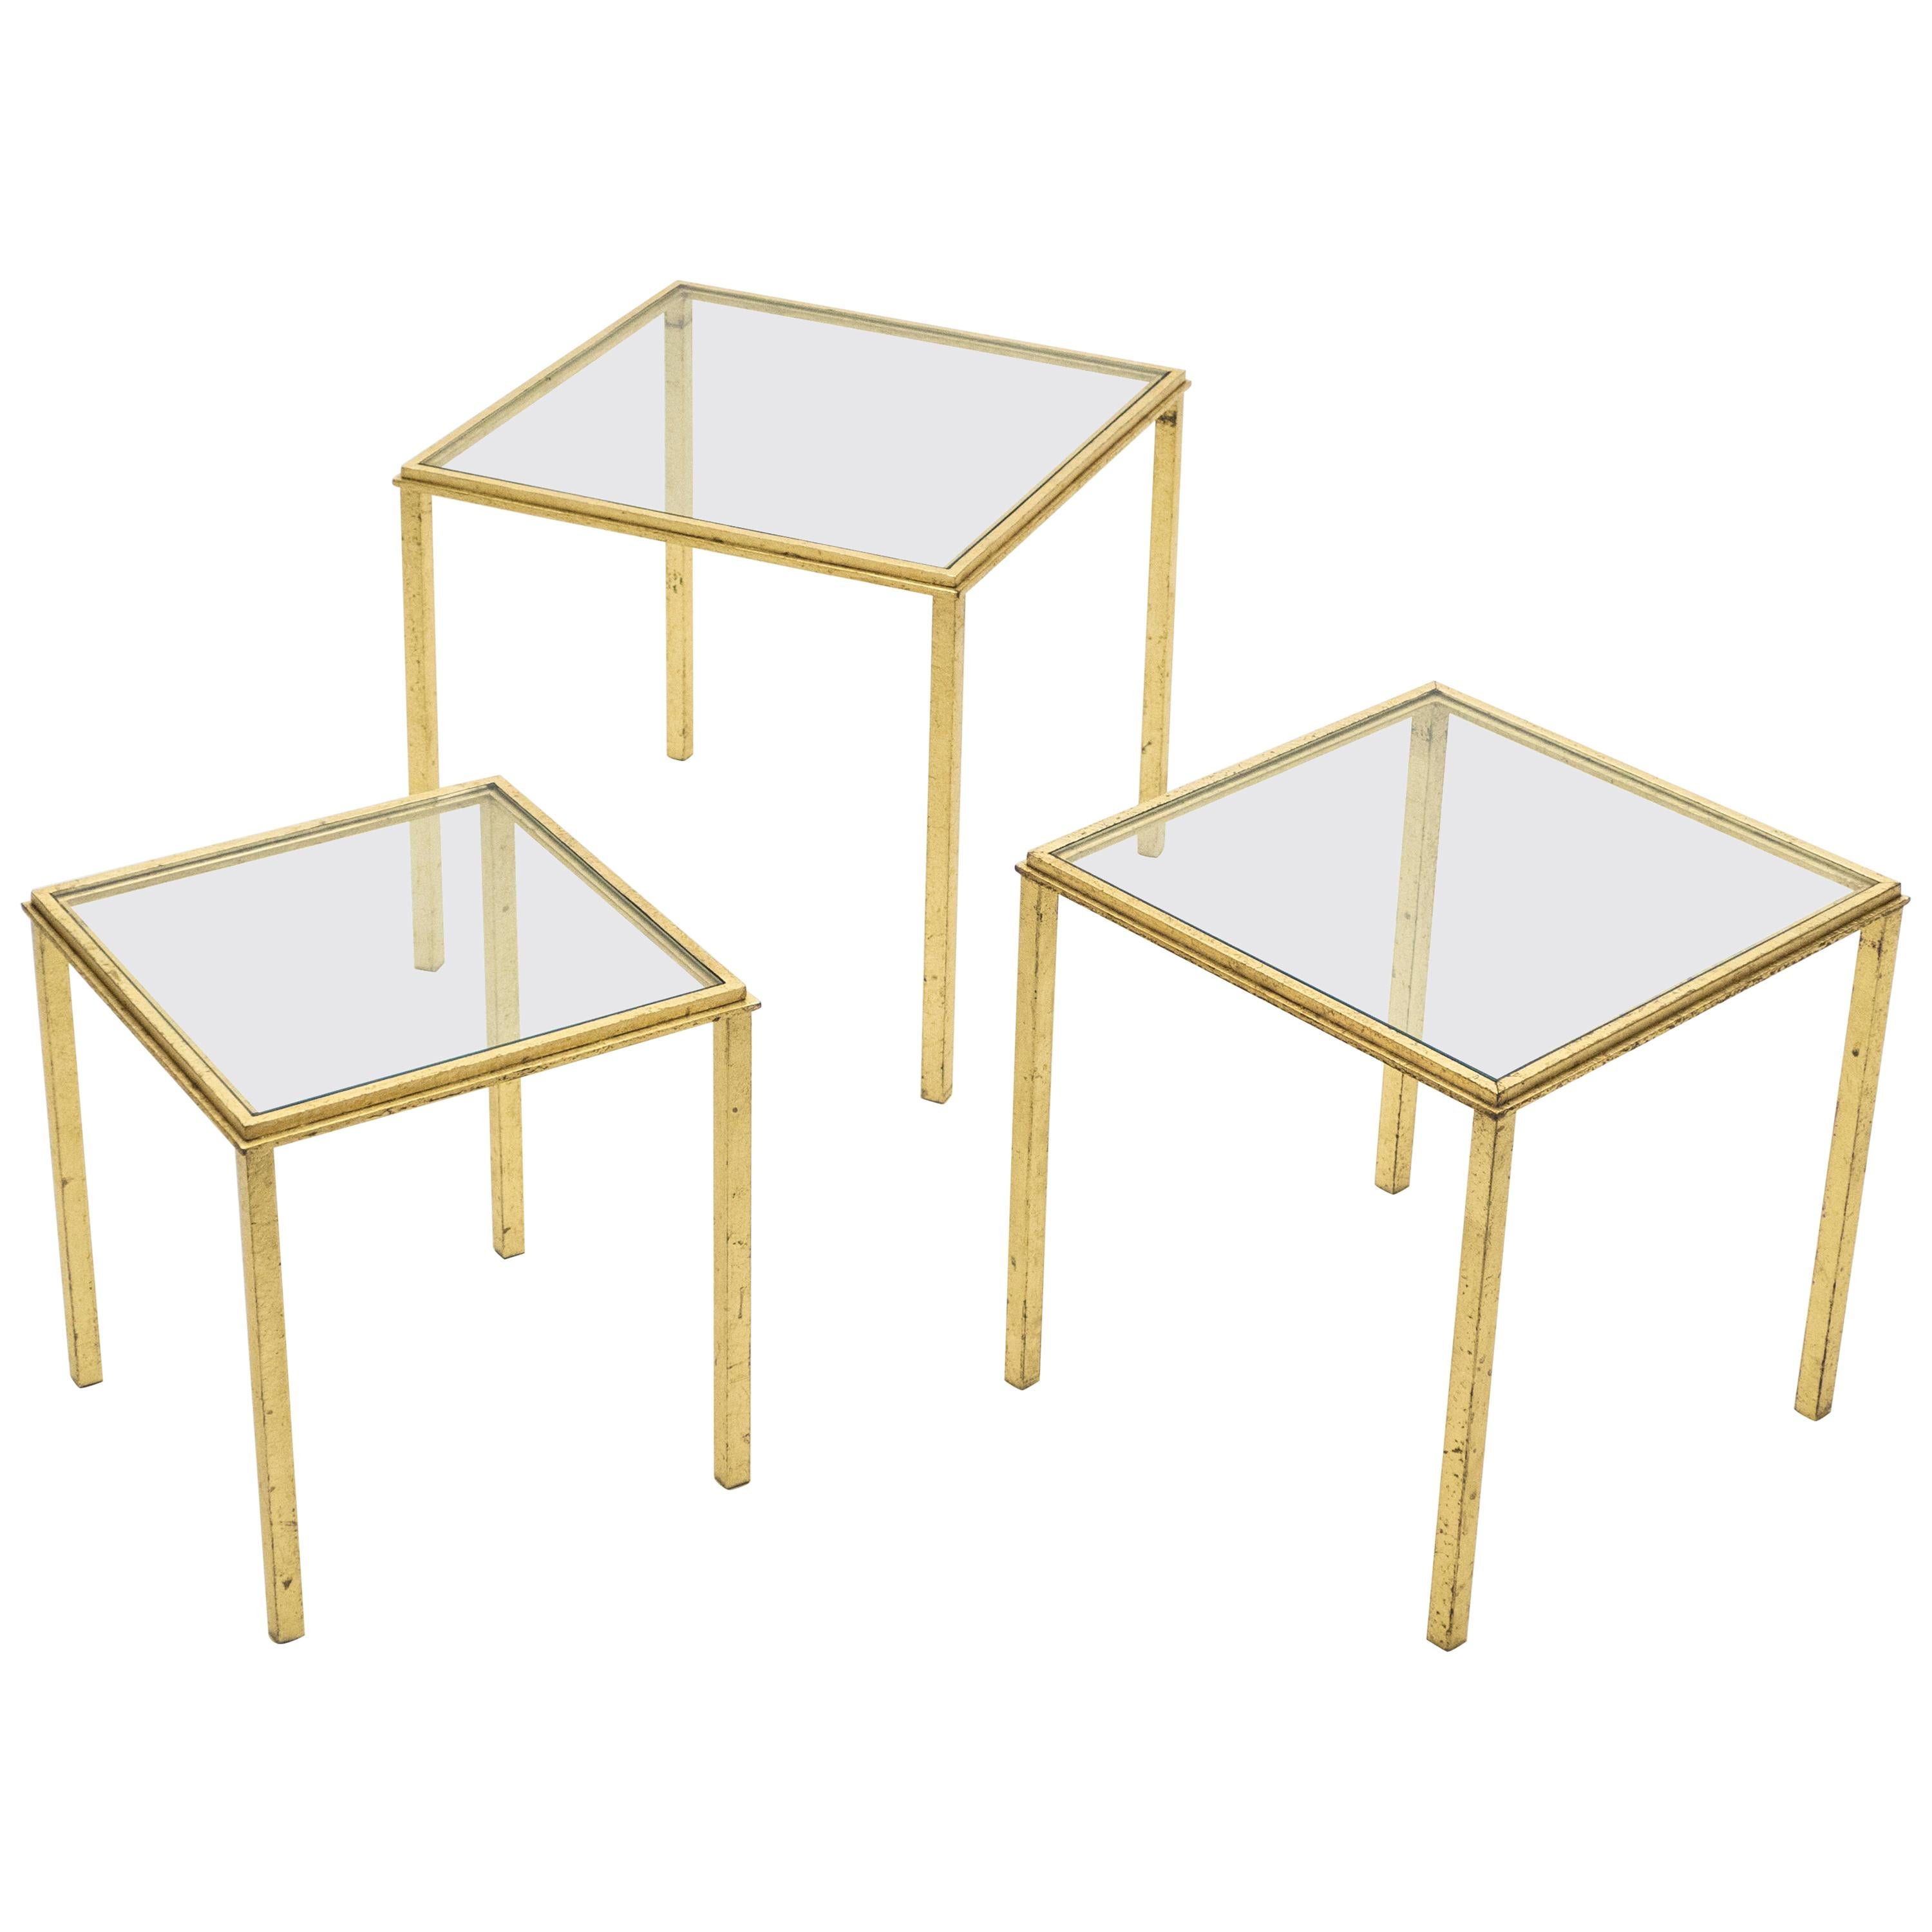 Midcentury Roger Thibier Gilt Wrought Iron Gold Leaf Nesting Tables, 1960s For Sale